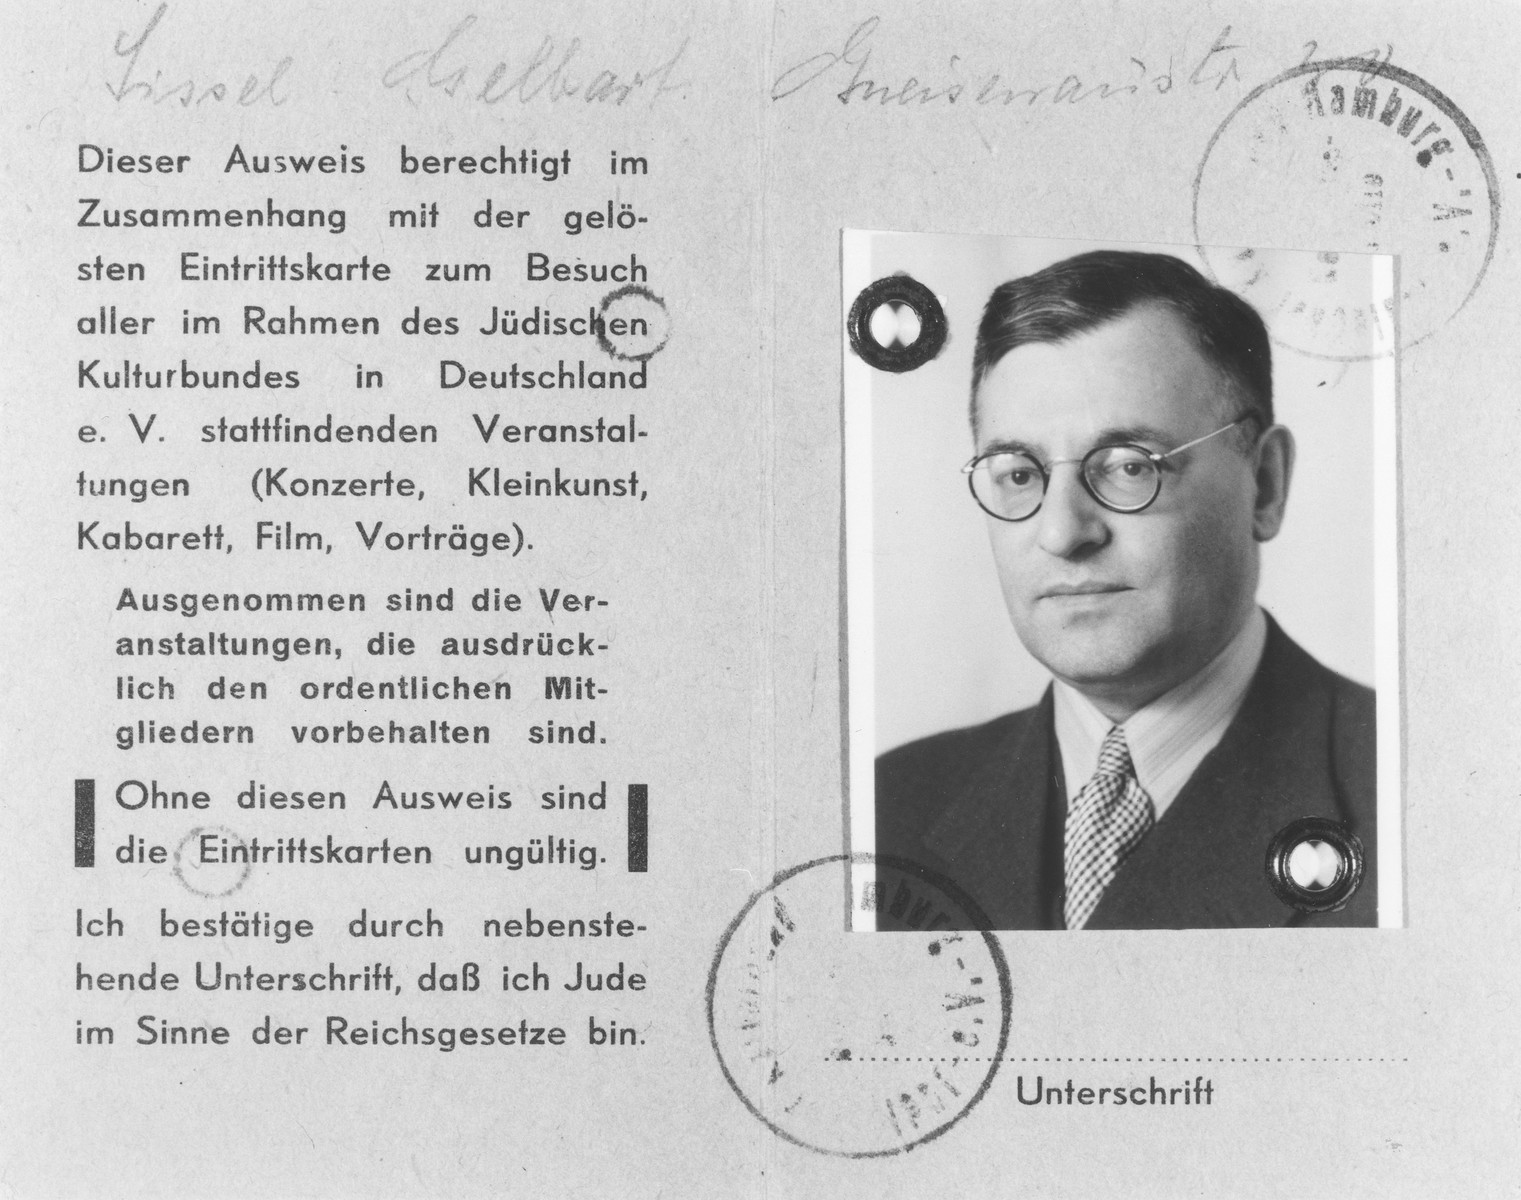 Membership card in the Juedischer Kulturbund issued to Cecil Gelbart, providing admission to Kulturbund concerts, plays and films.